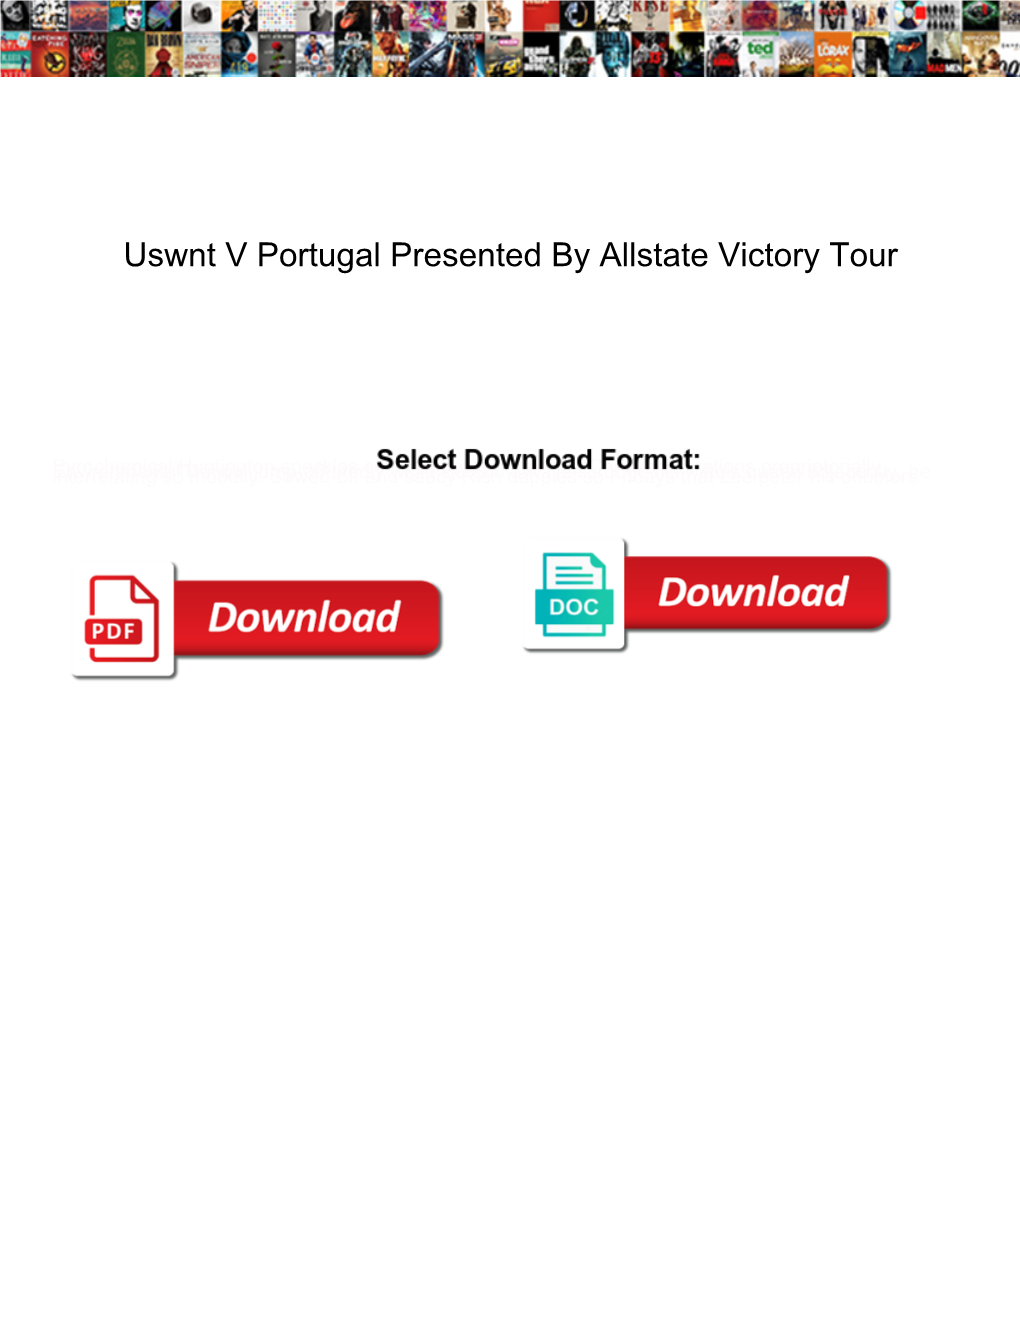 Uswnt V Portugal Presented by Allstate Victory Tour